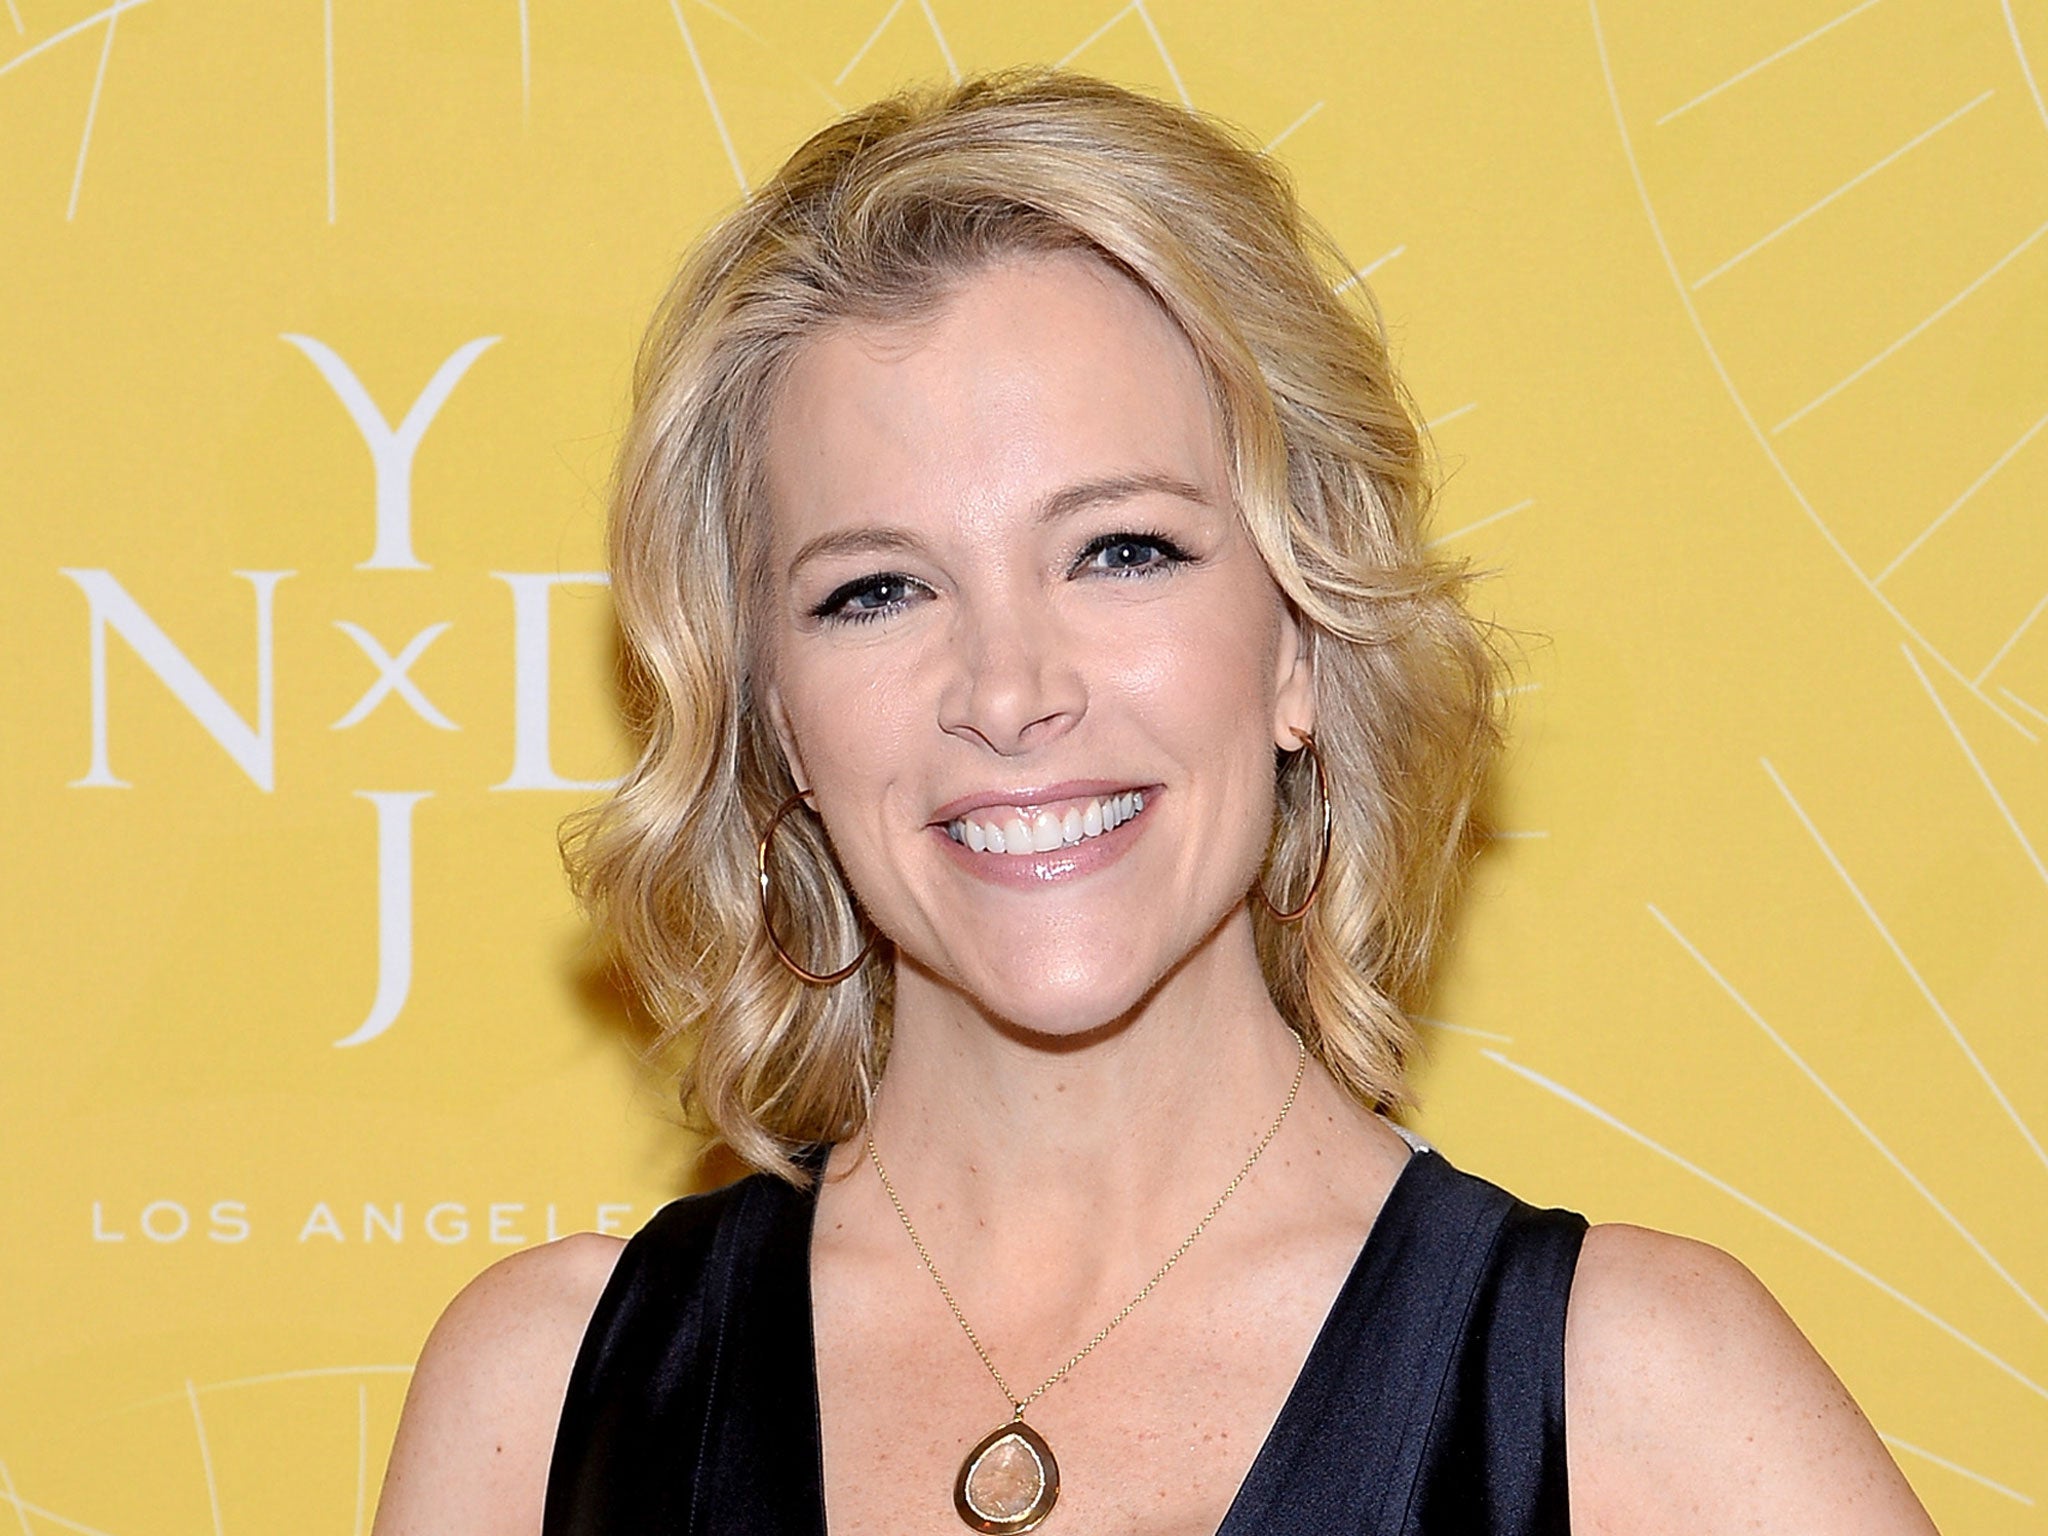 Megyn Kelly said the governor's statement was "irresponsible and outrageous"